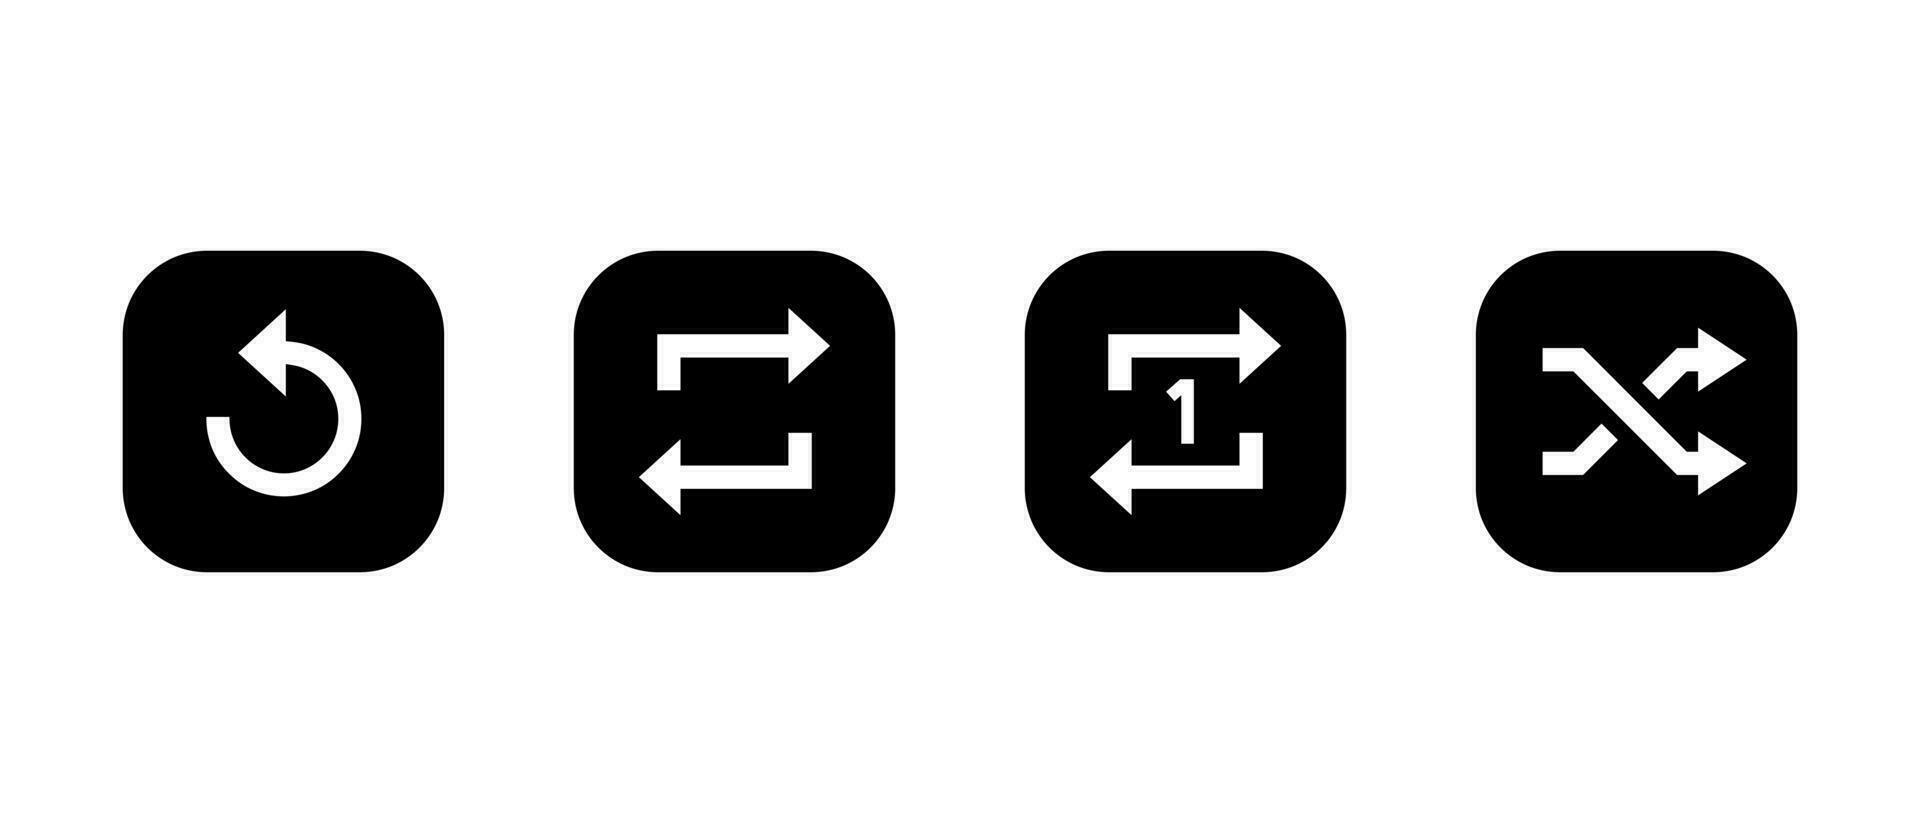 Replay, repeat, and shuffle playlist icon vector in square background